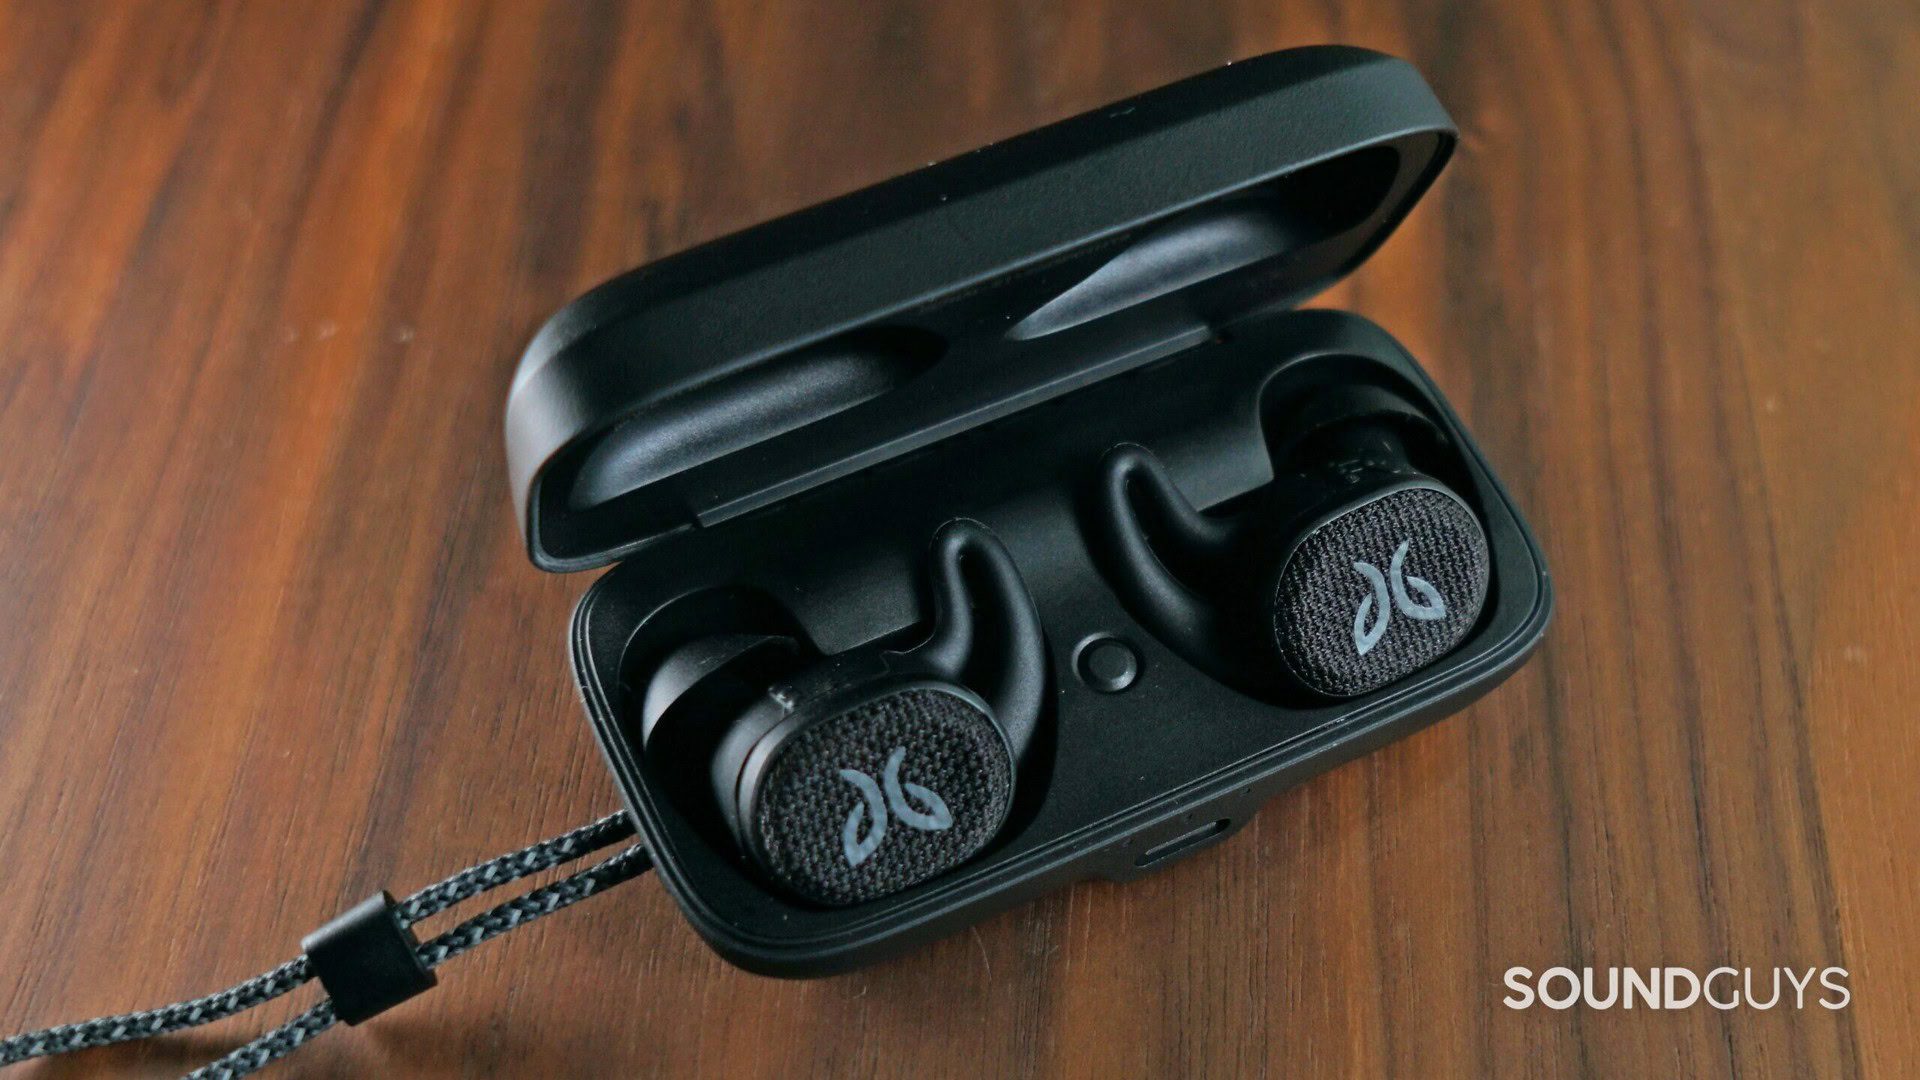 The Jaybird Vista 2 in black on top of a wood surface.